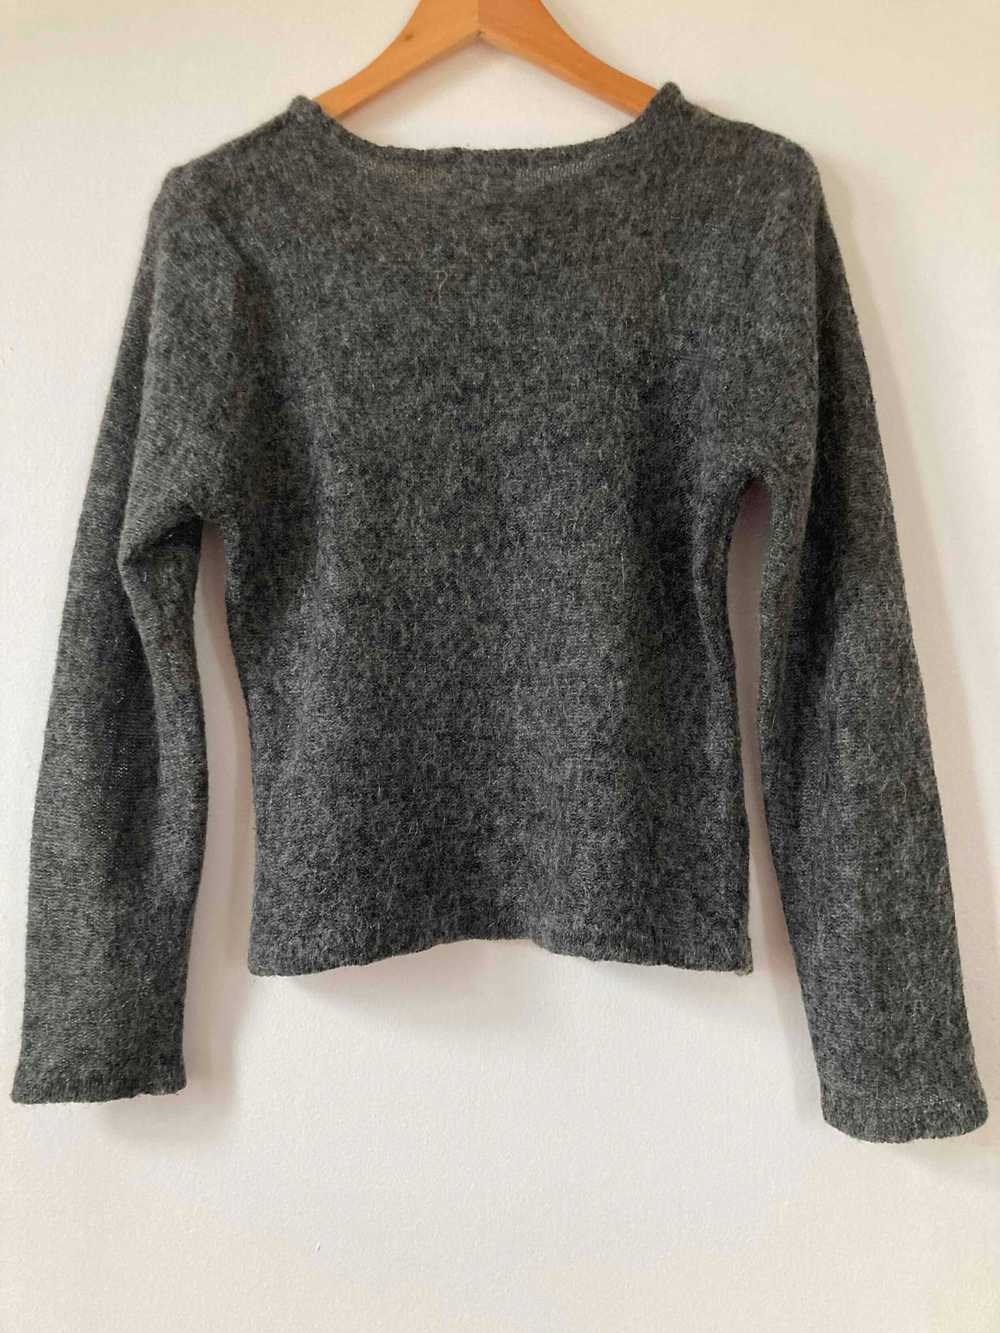 Mohair sweater - 90s mohair sweater Very fine and… - image 2